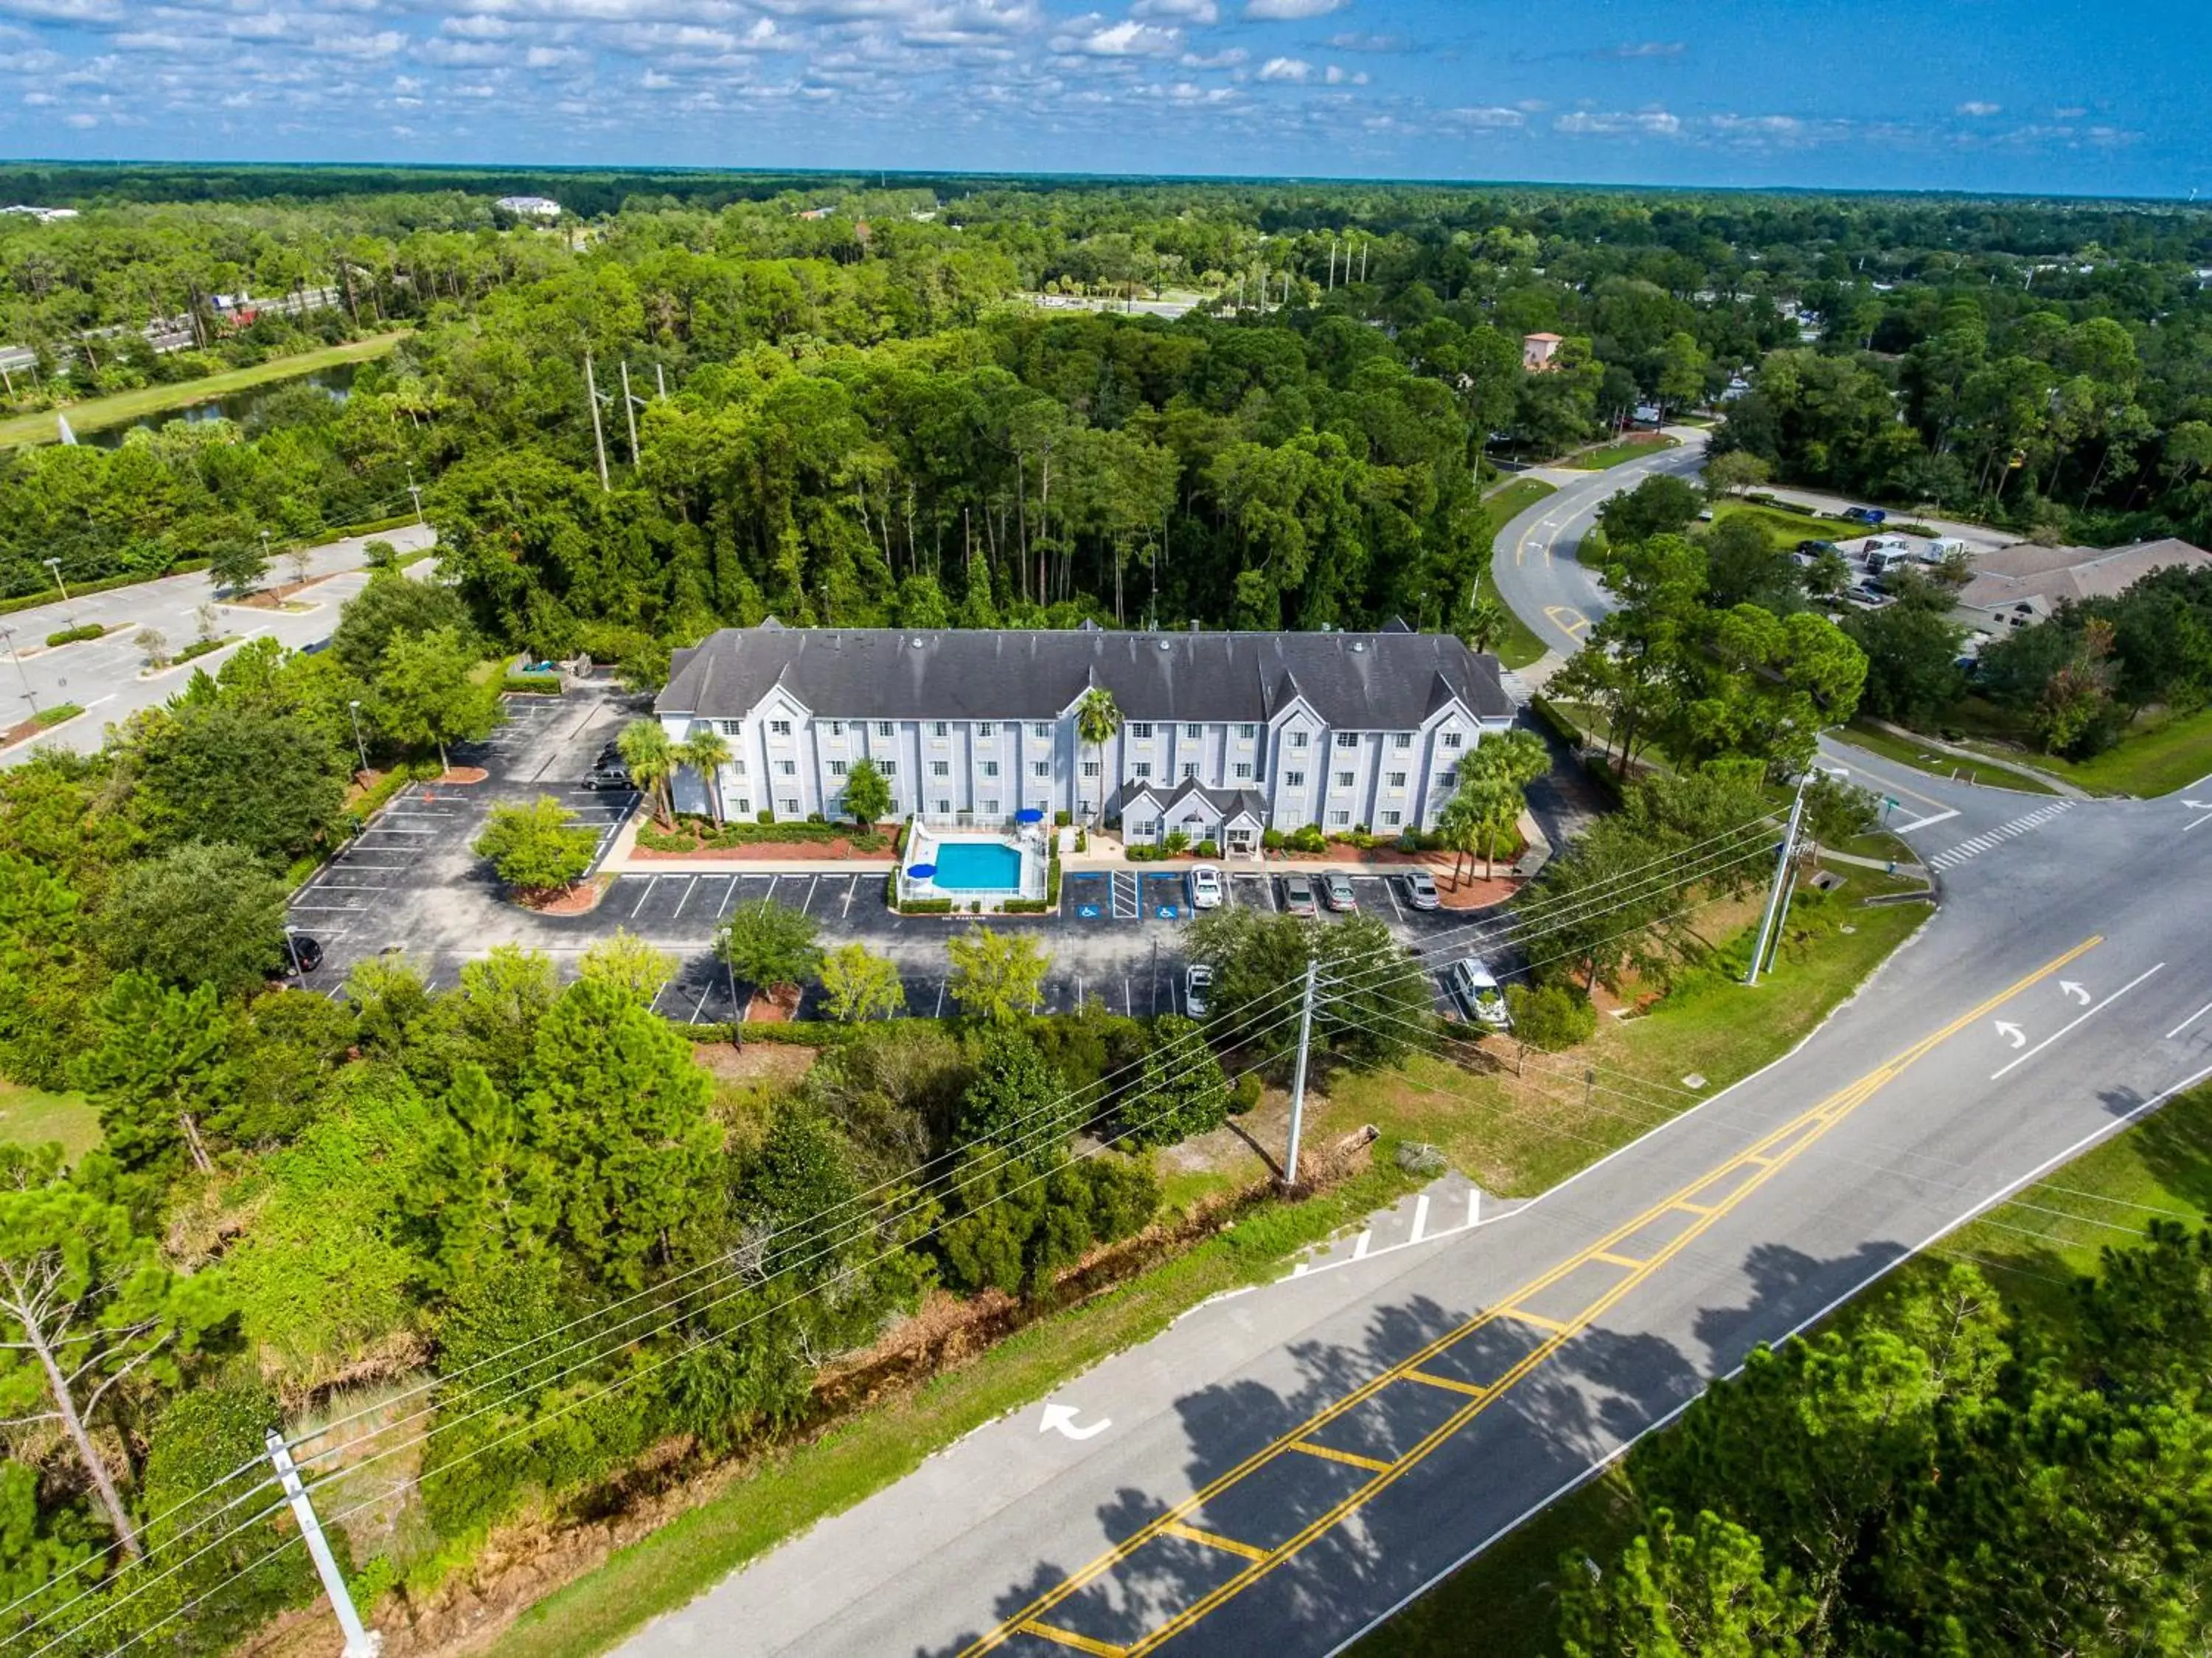 Property building, Bird's-eye View in Microtel Inn & Suites by Wyndham Palm Coast I-95